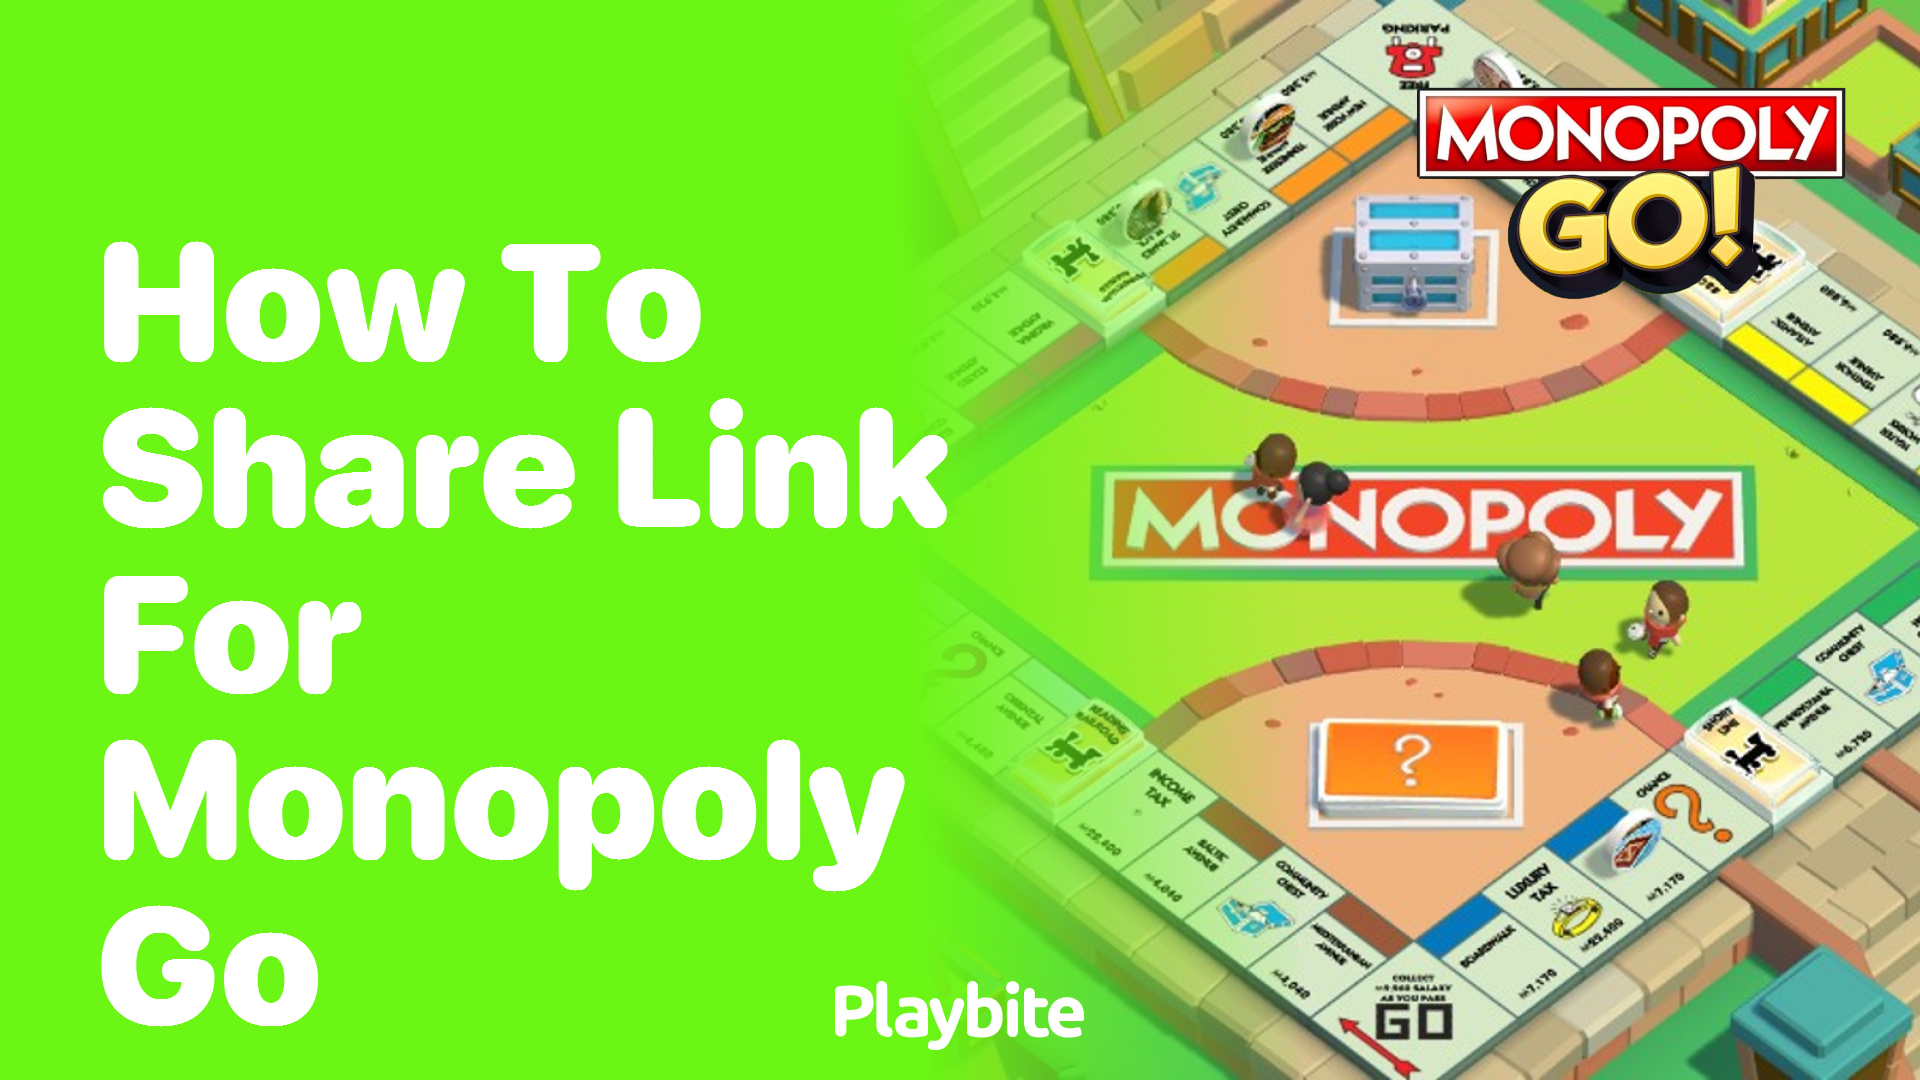 How to Share a Link for Monopoly Go: A Simple Guide